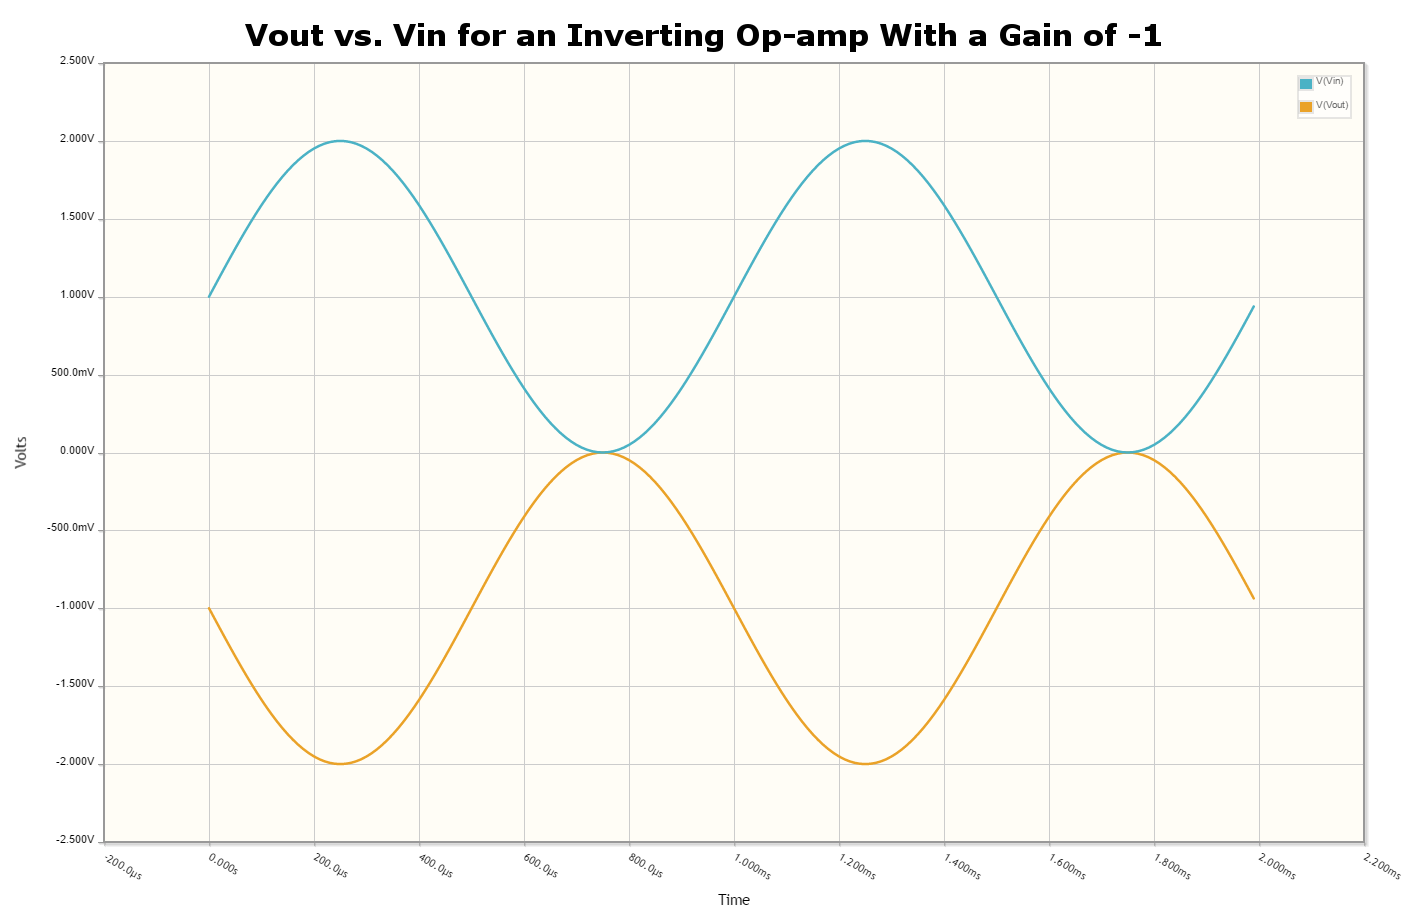 `\(v_{out}\)` vs. `\(v_{in}\)` for an inverting op-amp with a gain of -1.